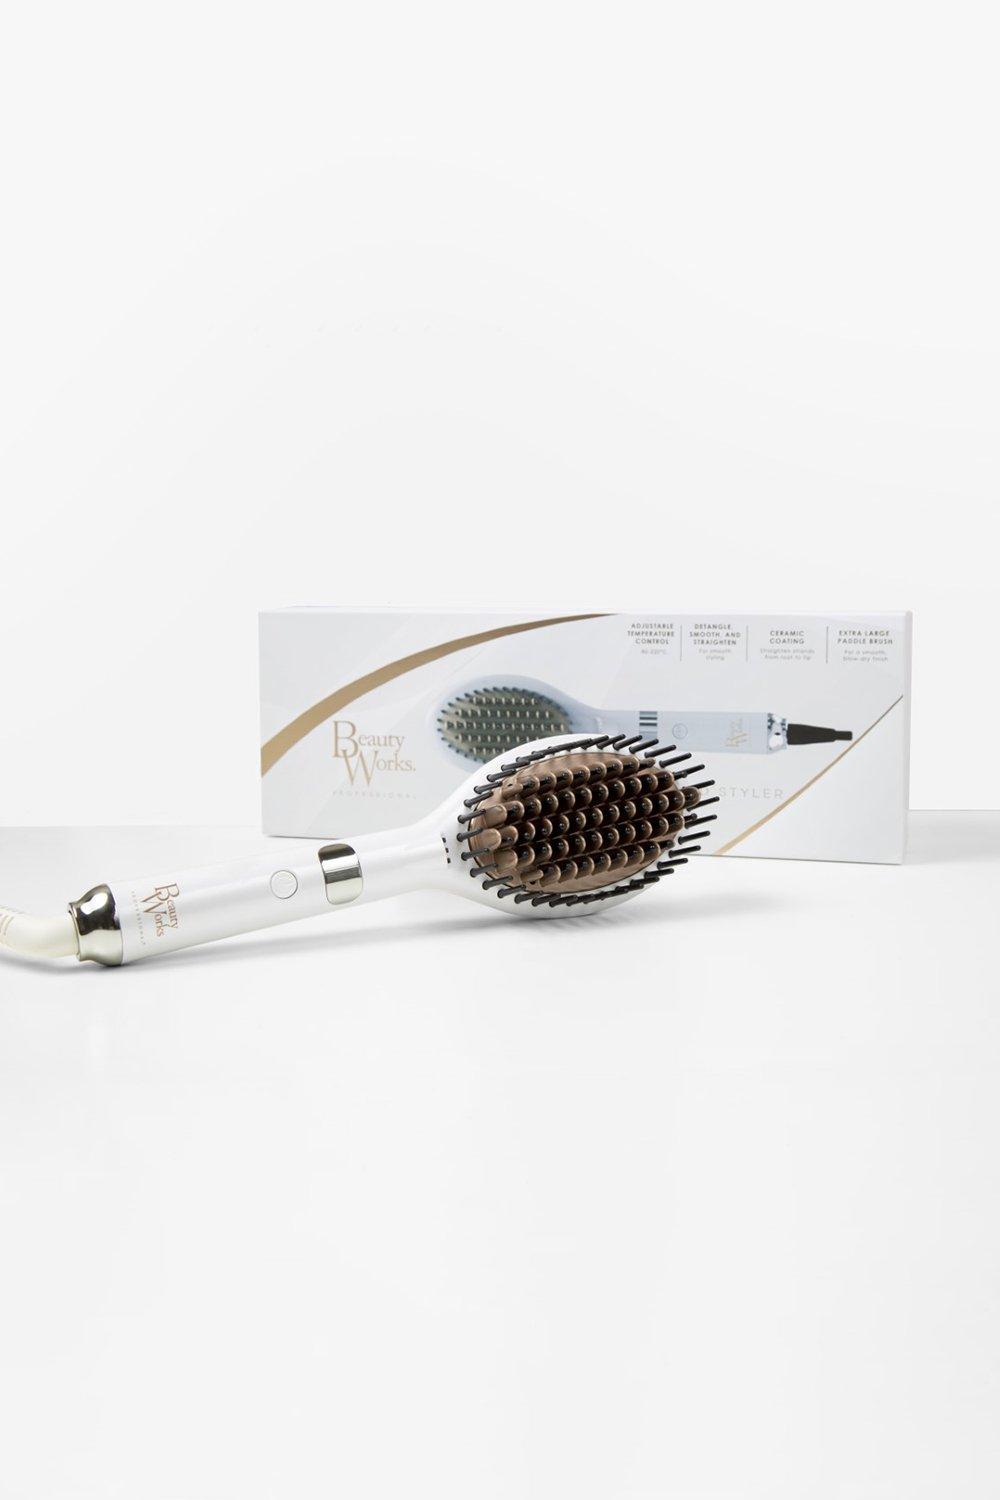 Beauty Works Smooth Styling Brush, White